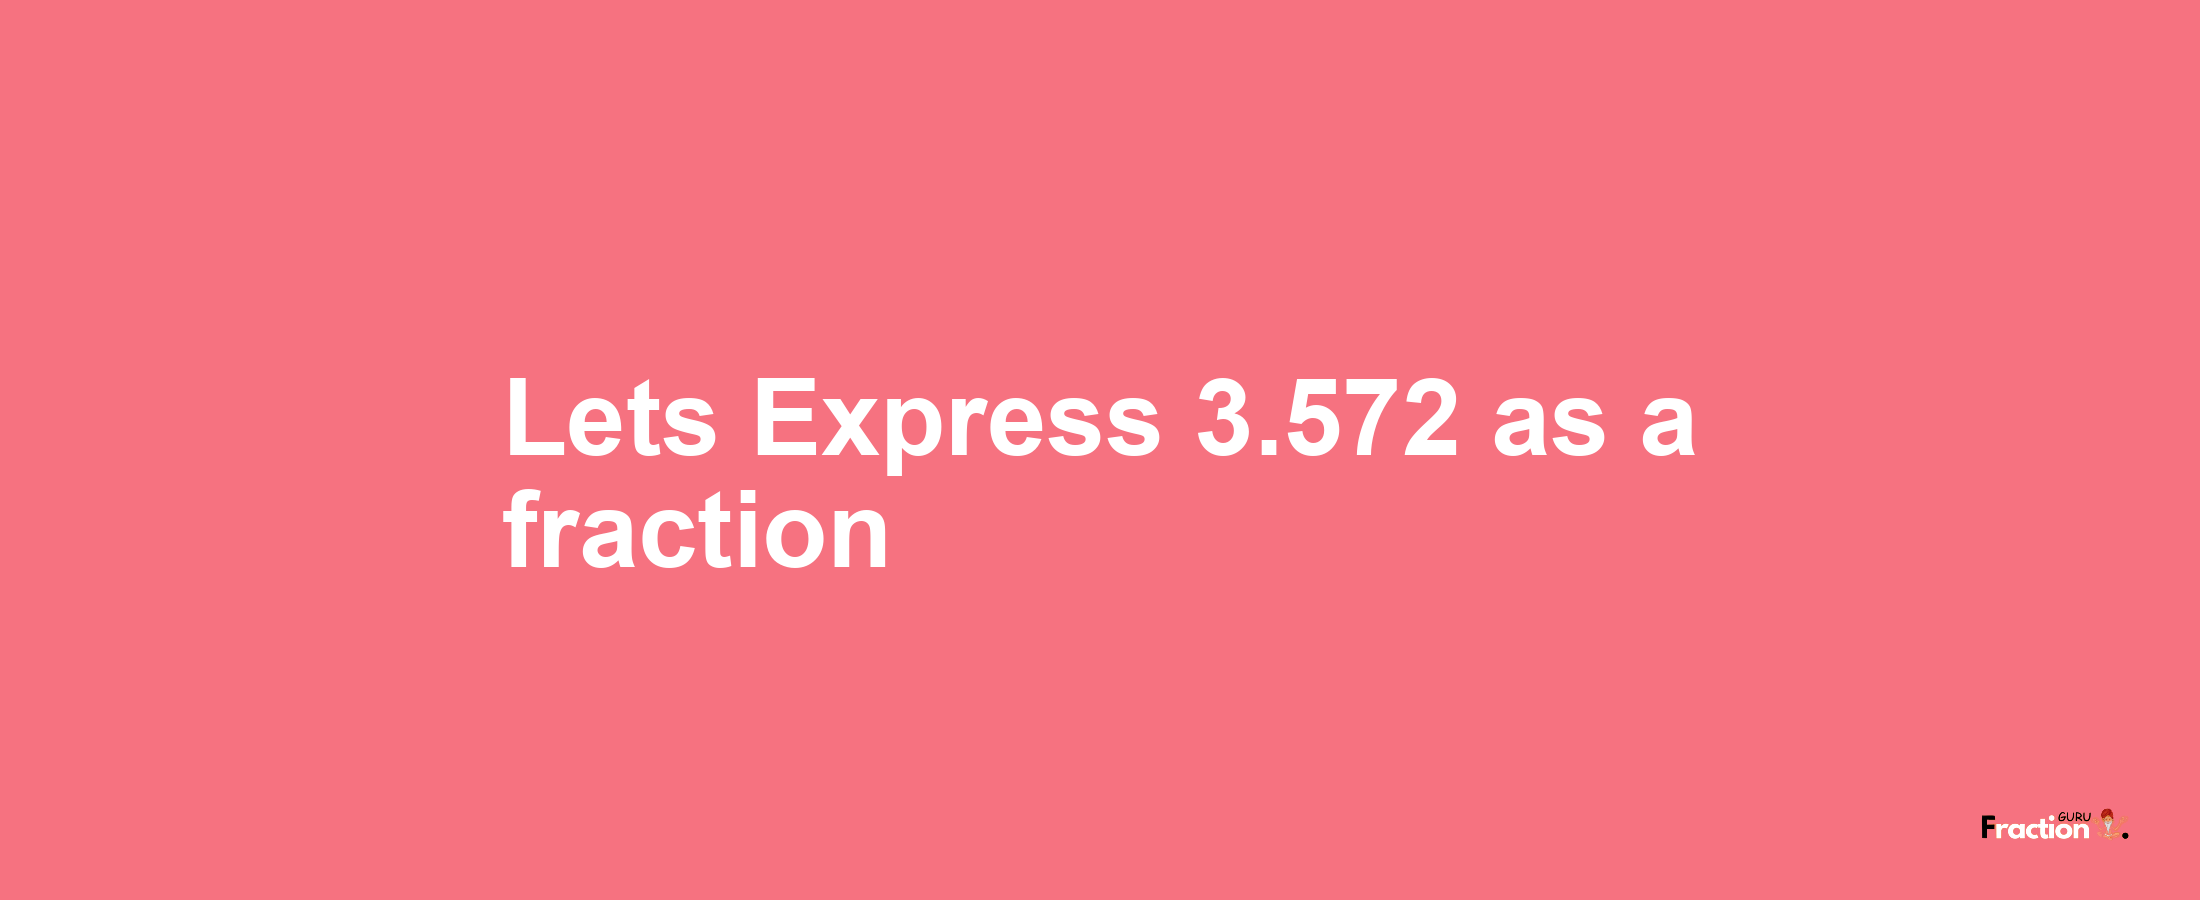 Lets Express 3.572 as afraction